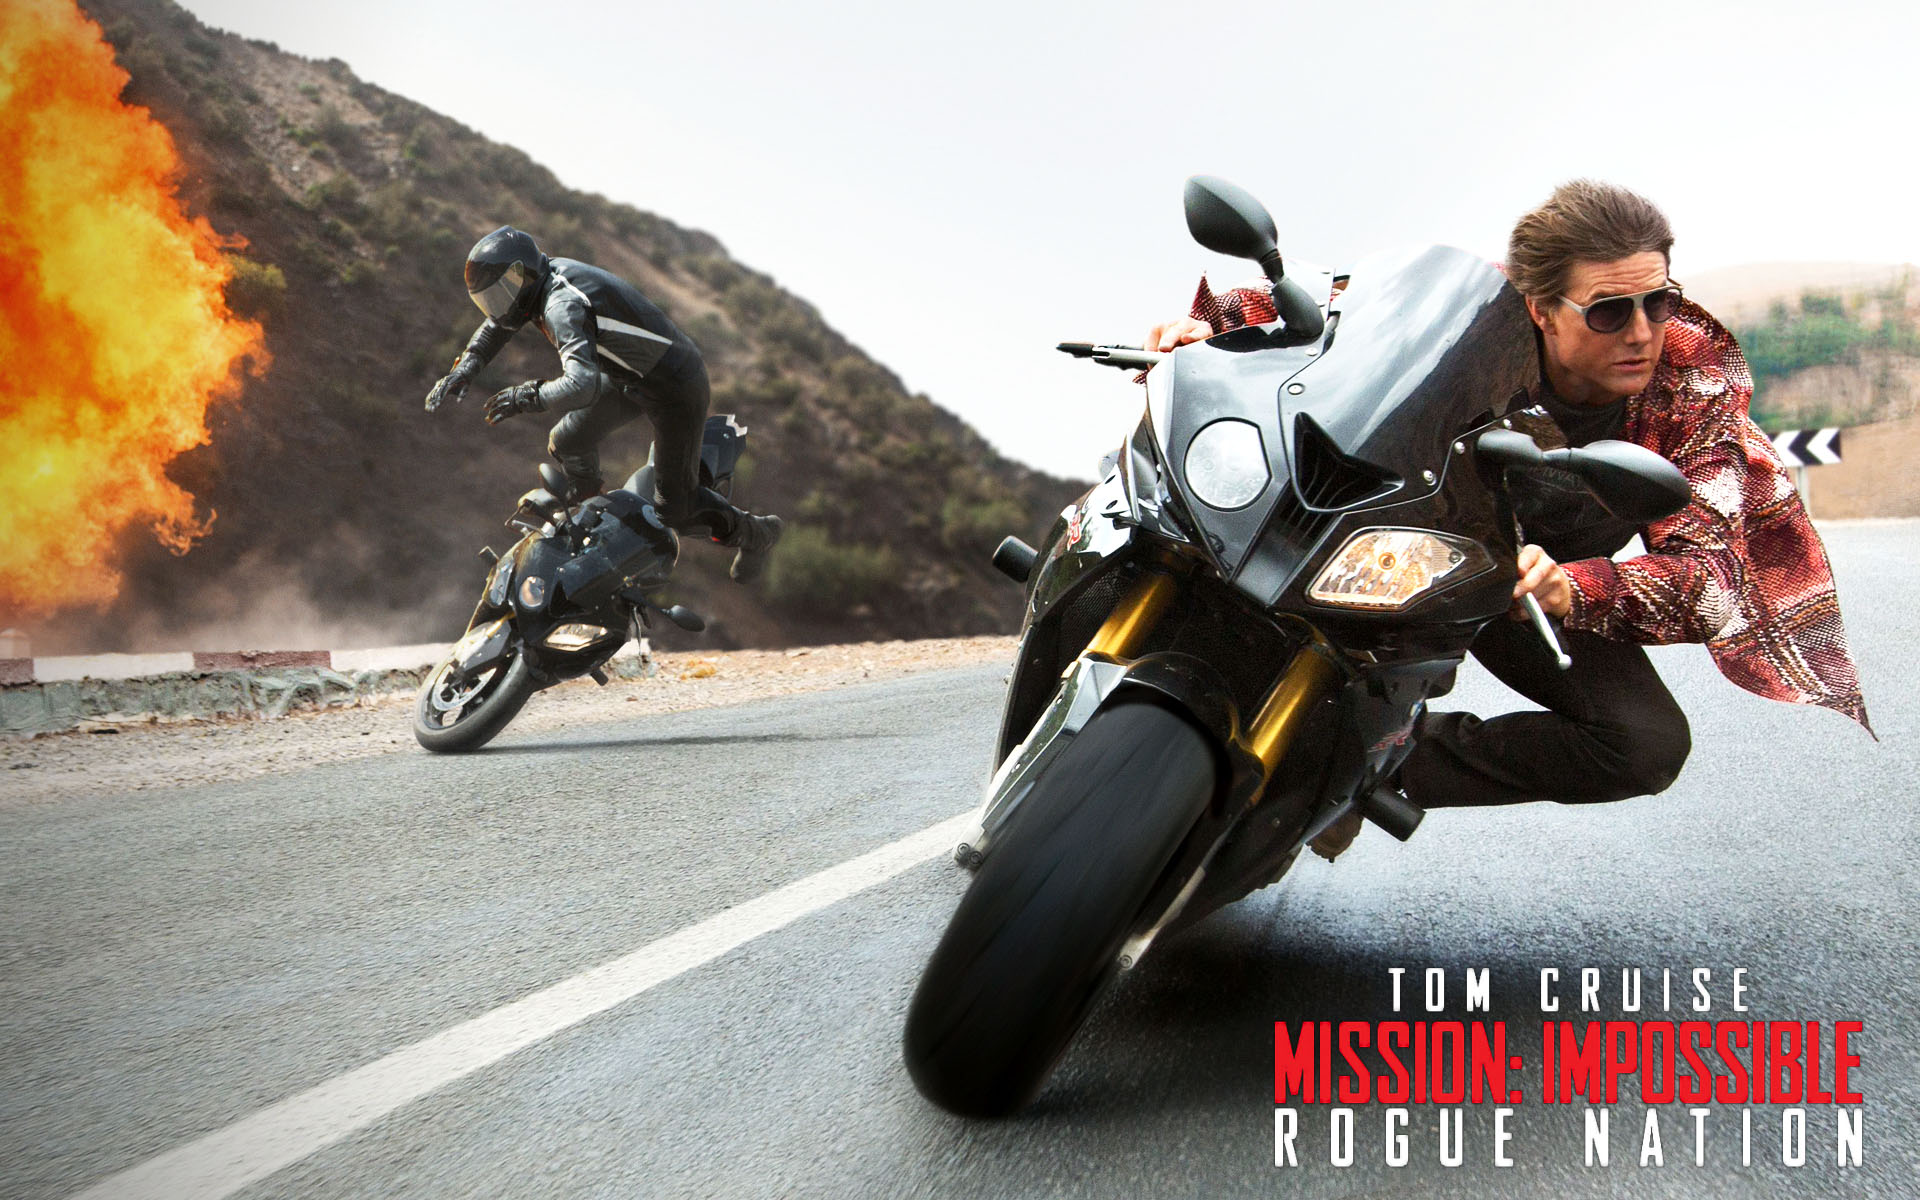 Mission: Impossible – Rogue Nation (2015) Tom-cruise-mission-impossible-5-rogue-nation-2015-bmw-s1000rr-motorbike-wallpaper